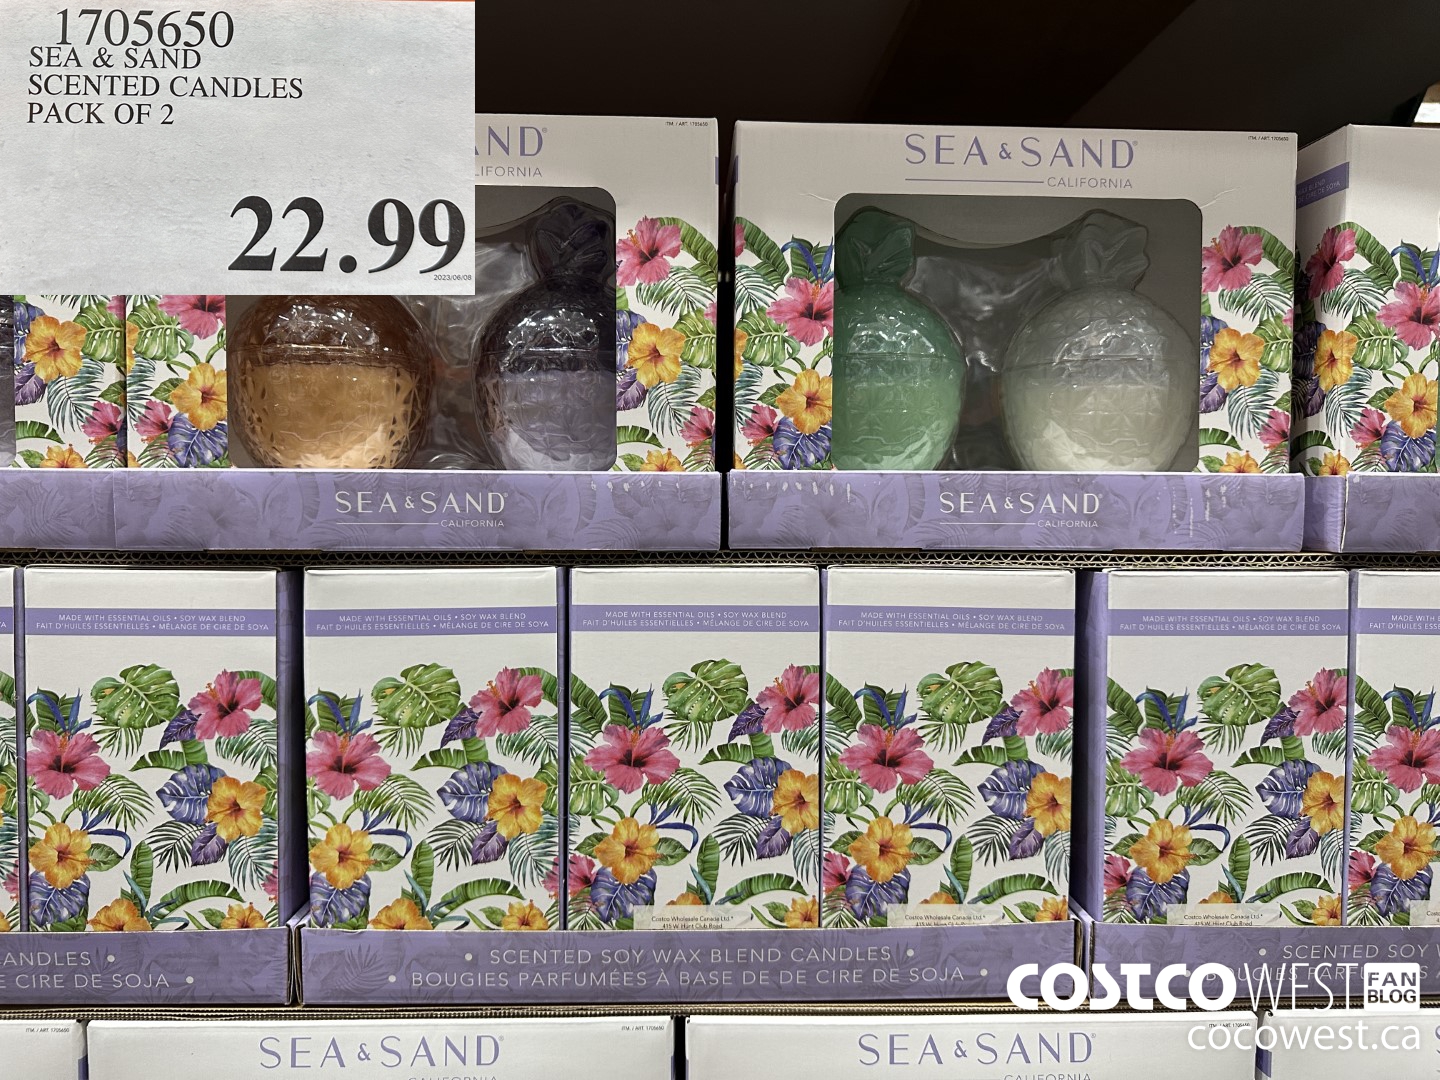 Brand is sea and sand @Costco Wholesale #costcofind #costcofinds #cand